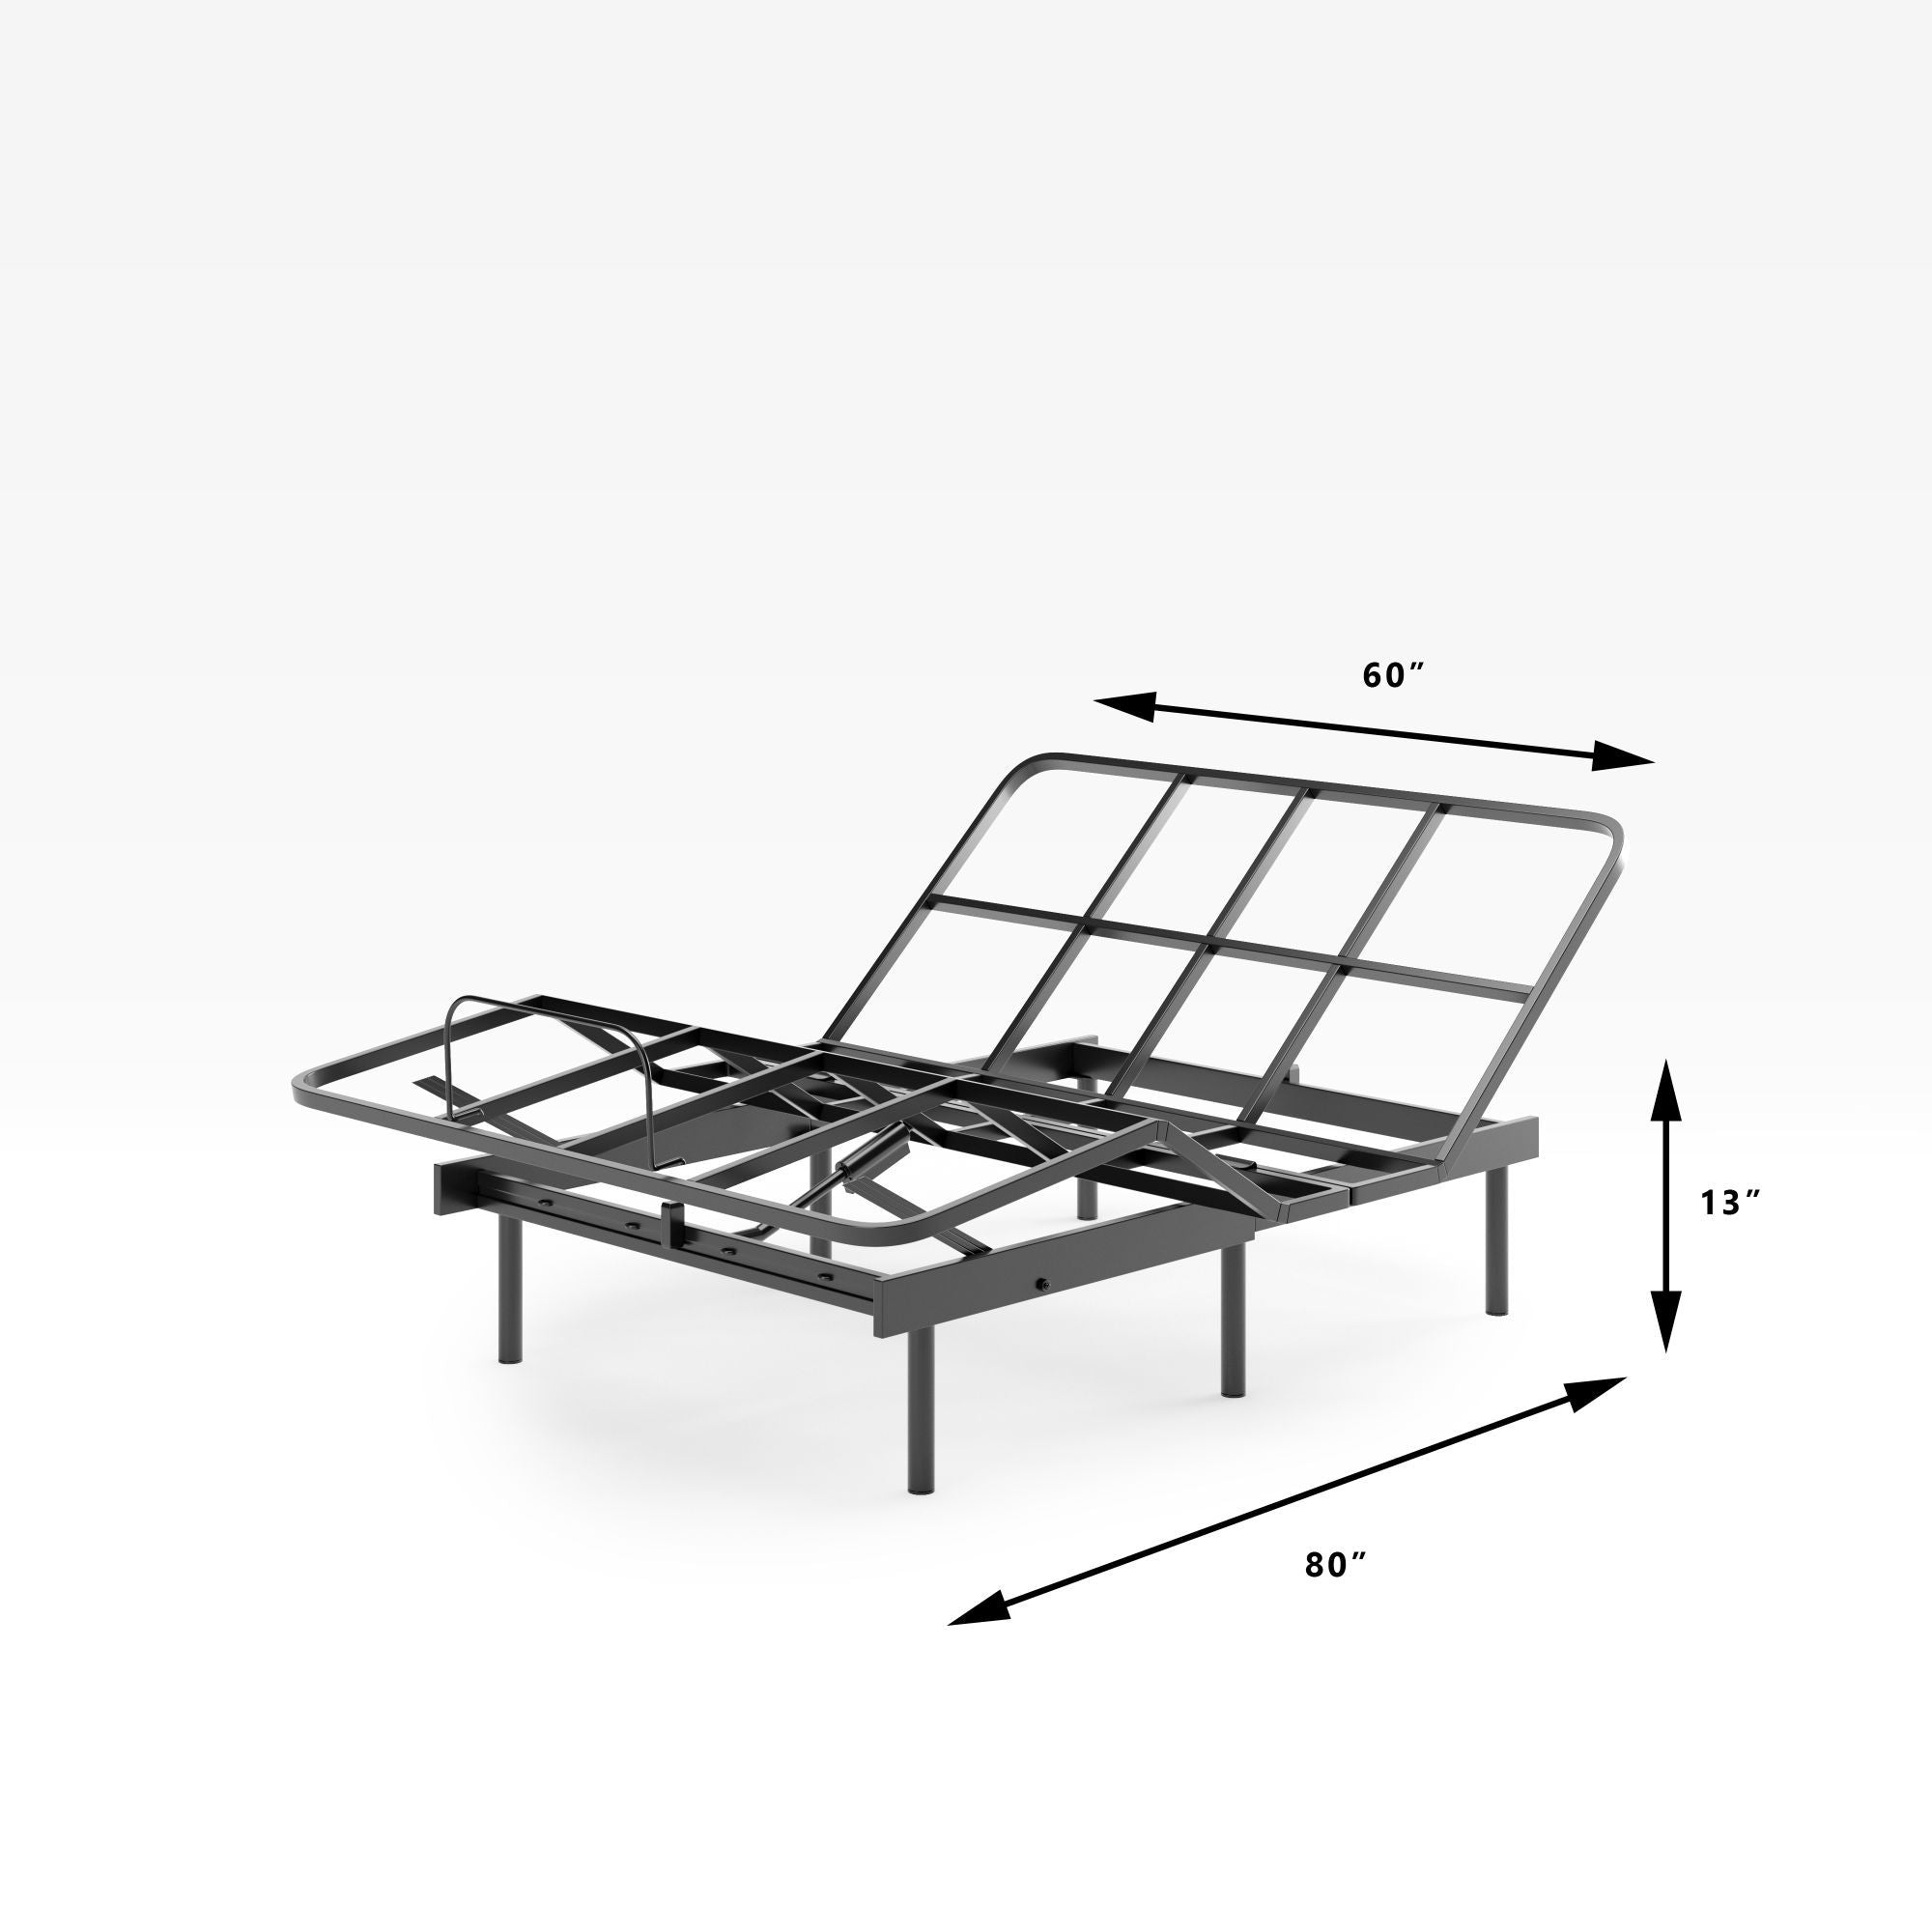 Metal Adjustable Bed Frame with Head and Foot Incline